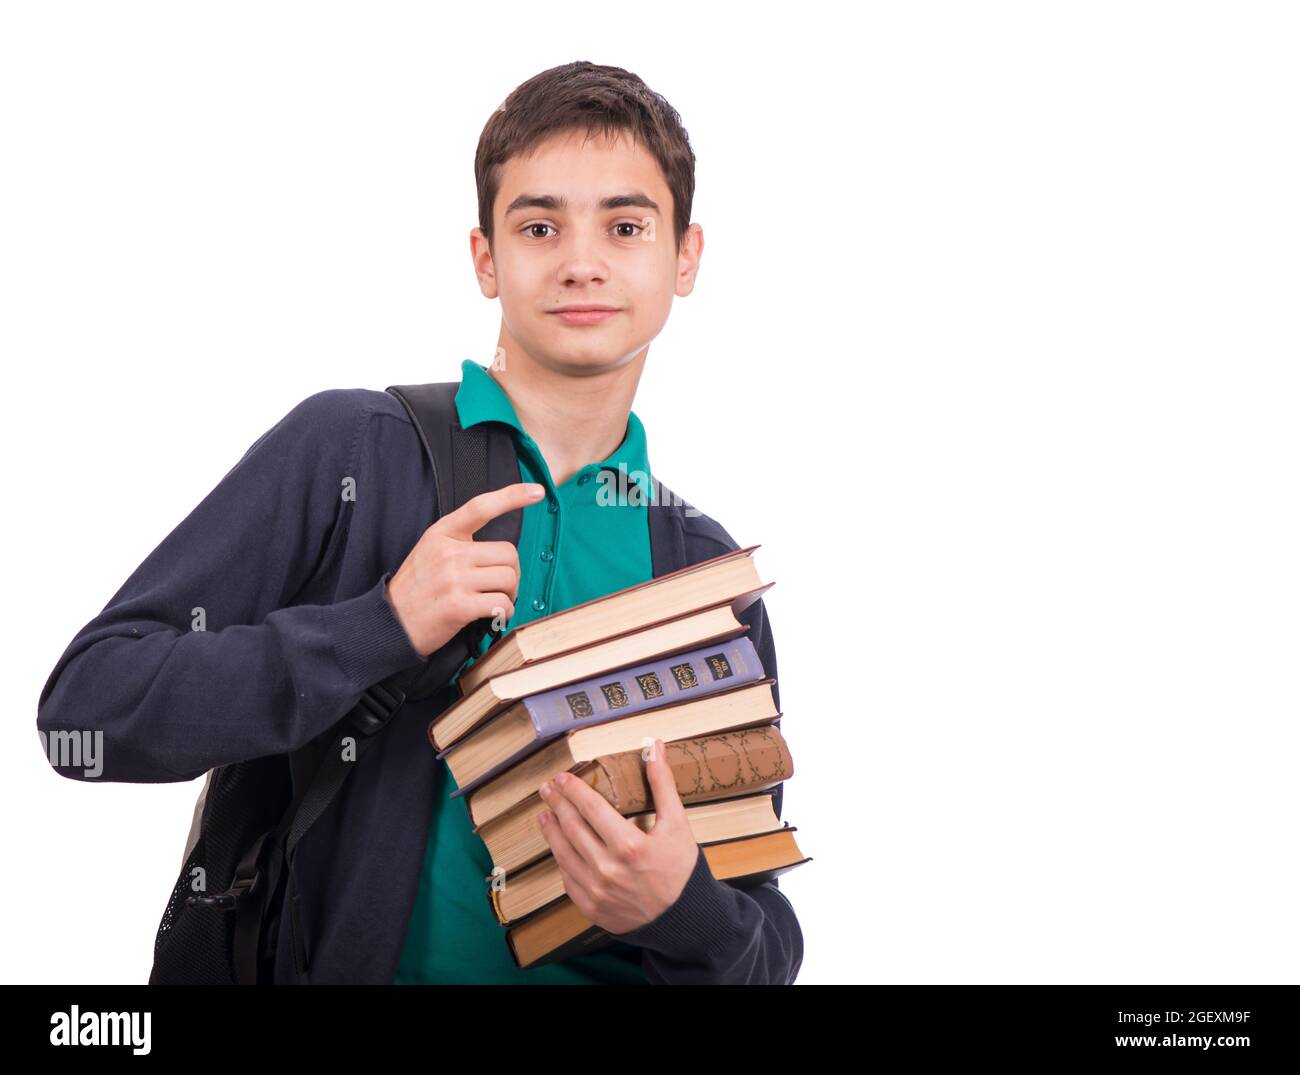 schoolboy holding a stack of books, textbook isolated on white background . Close-up. Stock Photo